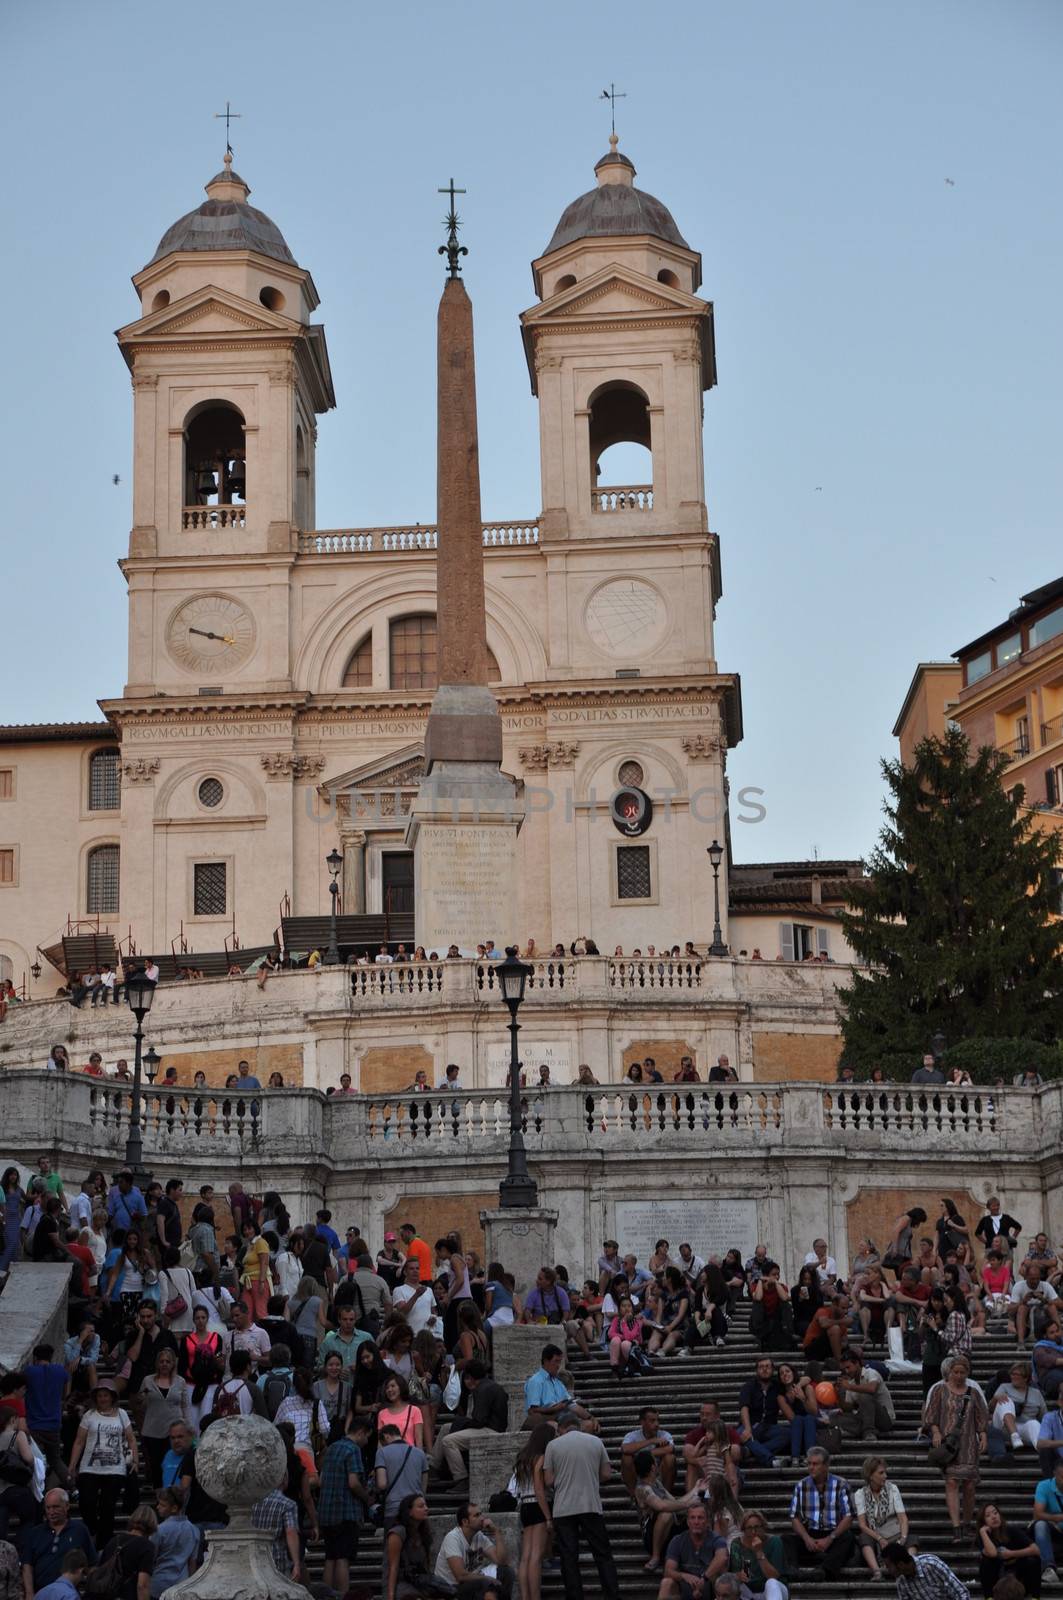 ROME - SEPTEMBER 20: People sitting on the Spanish Steps in Rome by anderm